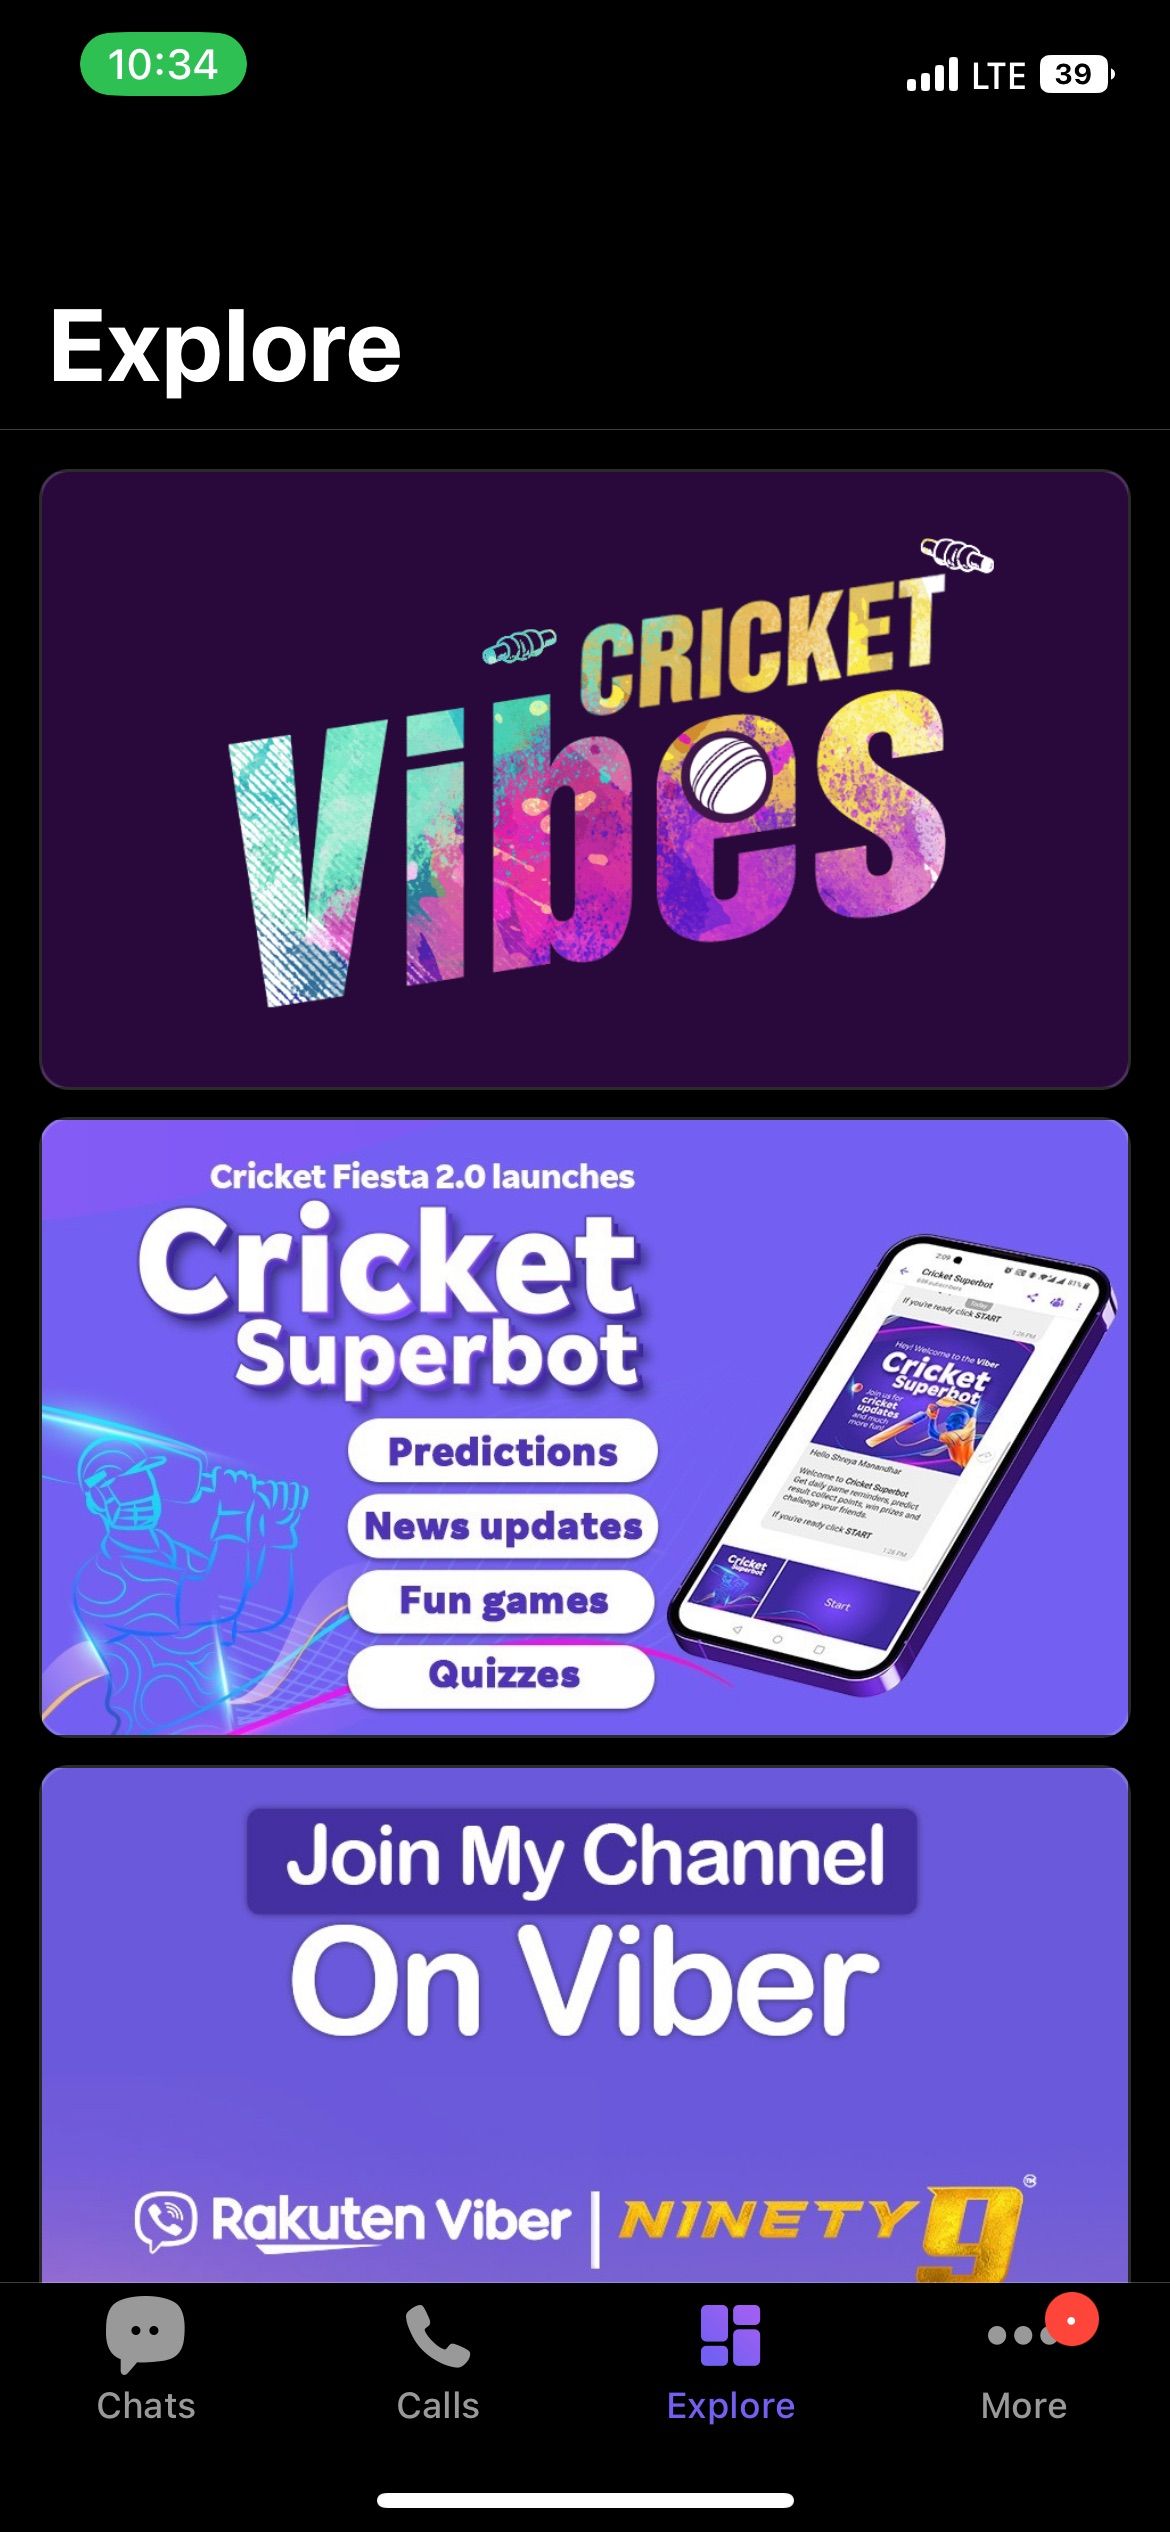 Explore Channels and communities page in Viber